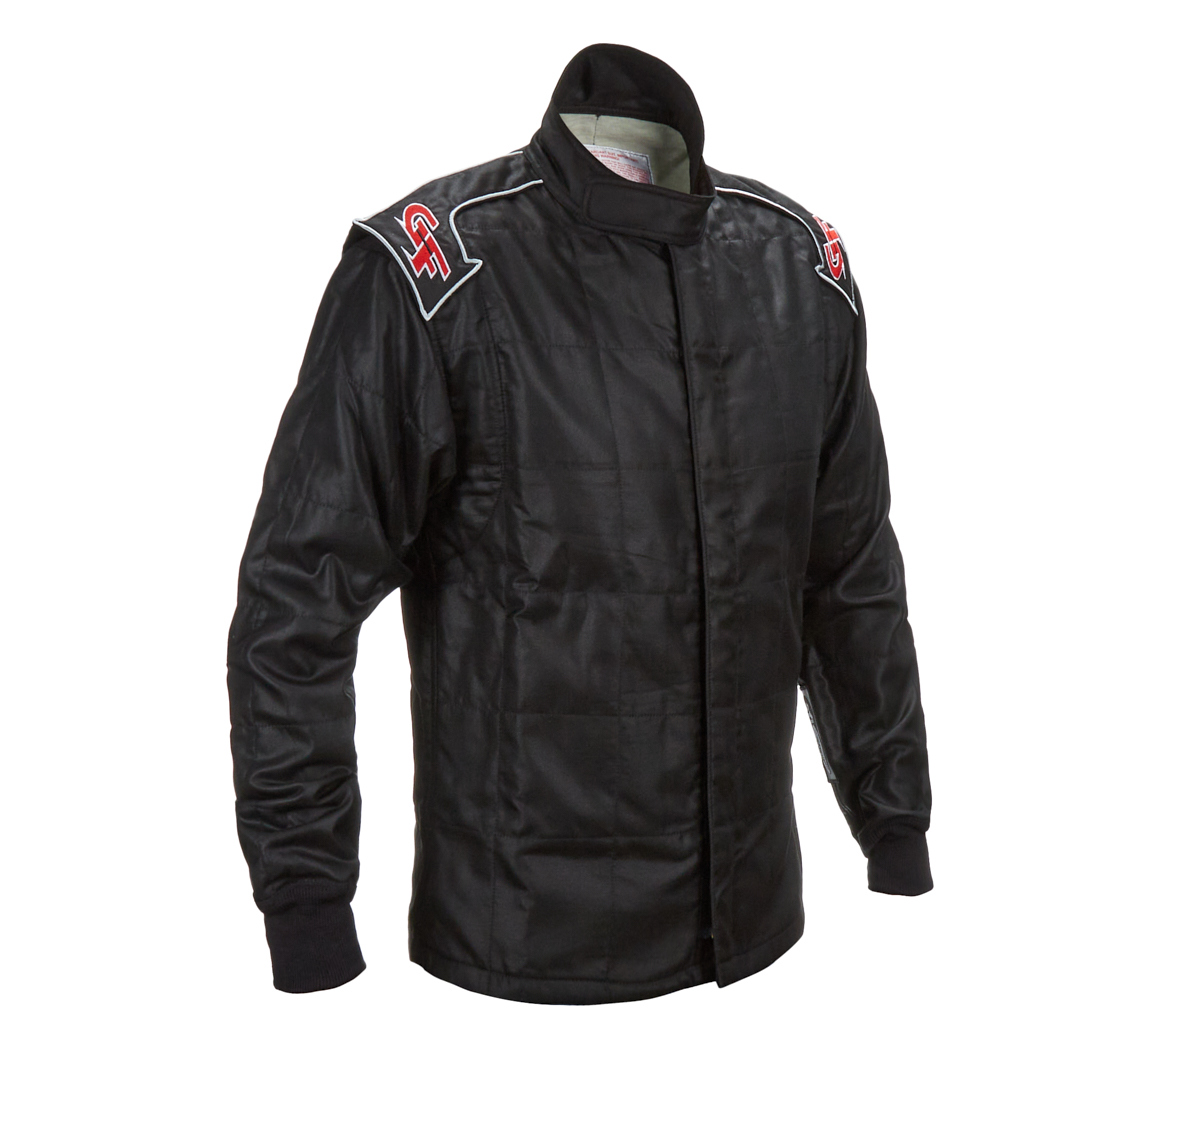 G-Force Racing Gear 35452SMLBK Driving Jacket, G-Limit, SFI 3.2A/5, Multiple Layer, Fire Retardant Cotton / Nomex, Black, Small, Each